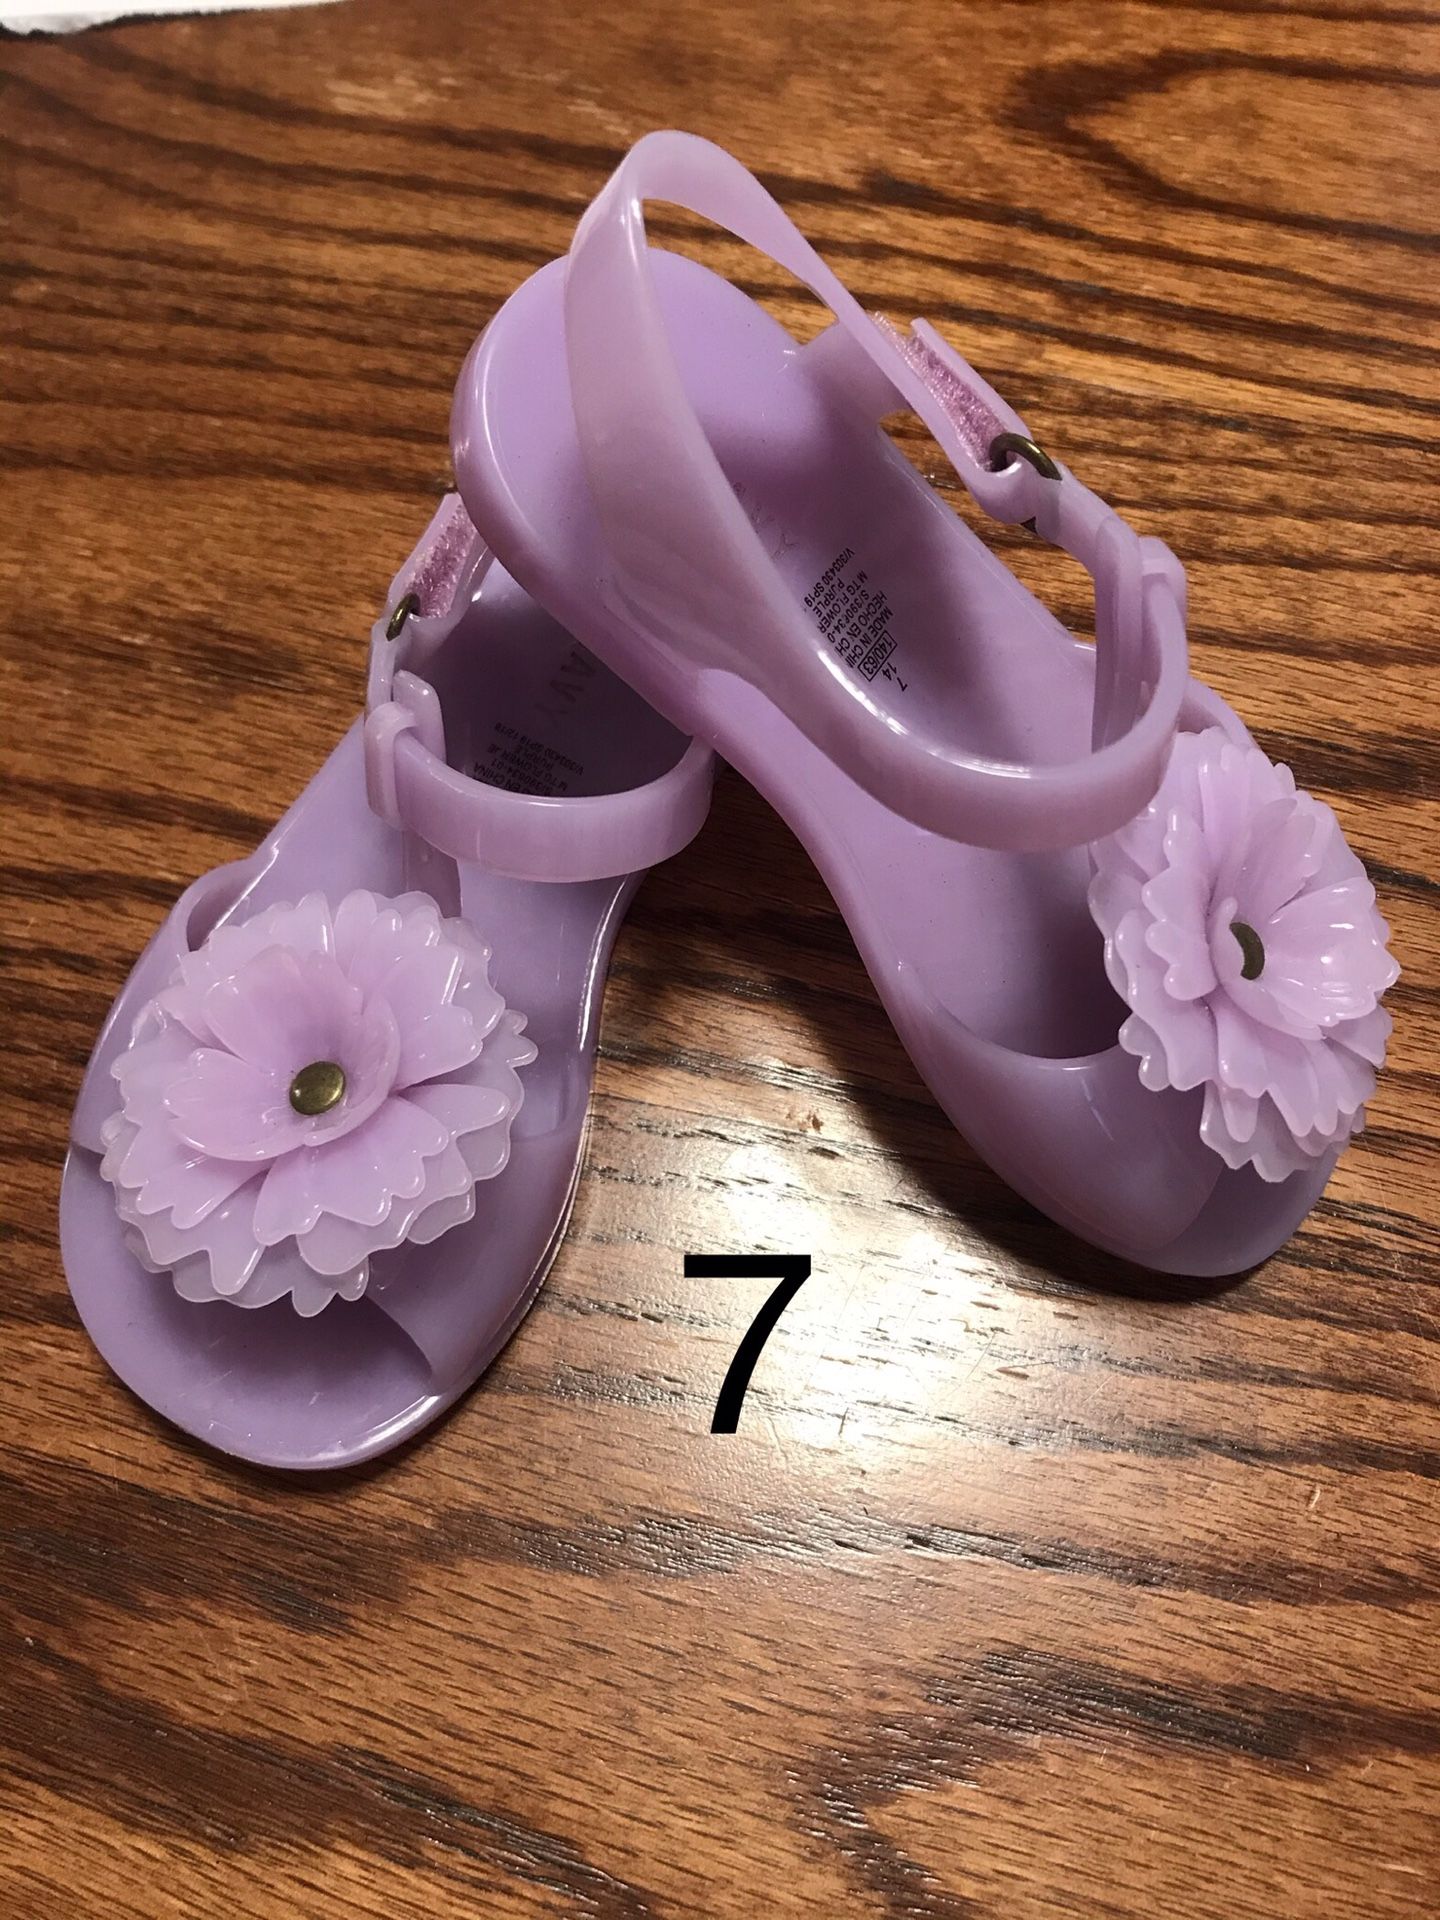 Used Very good condition Girls Sandals Size 7